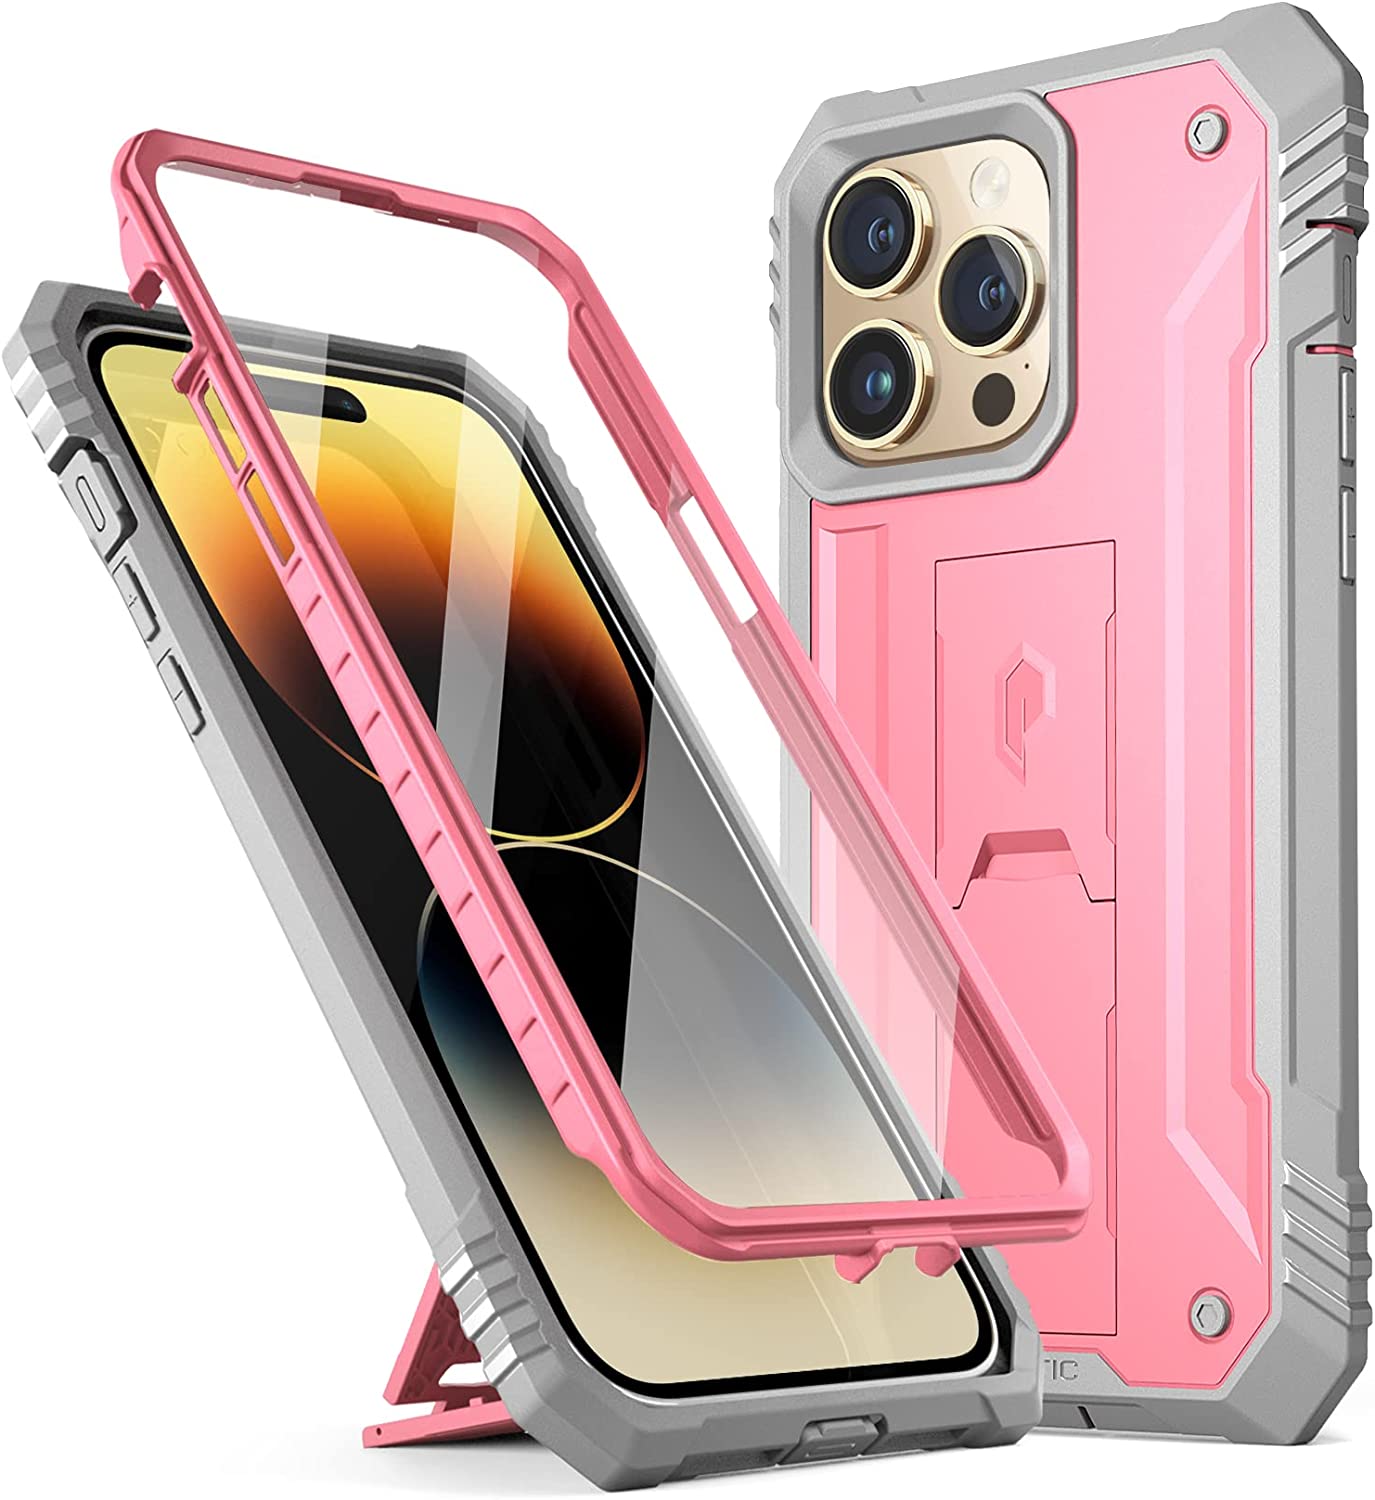 Poetic Neon iPhone 14 Pro Max Case - Dual Layer Rugged Slim Shockproof Protective Cover, 6.7 inch, Mint